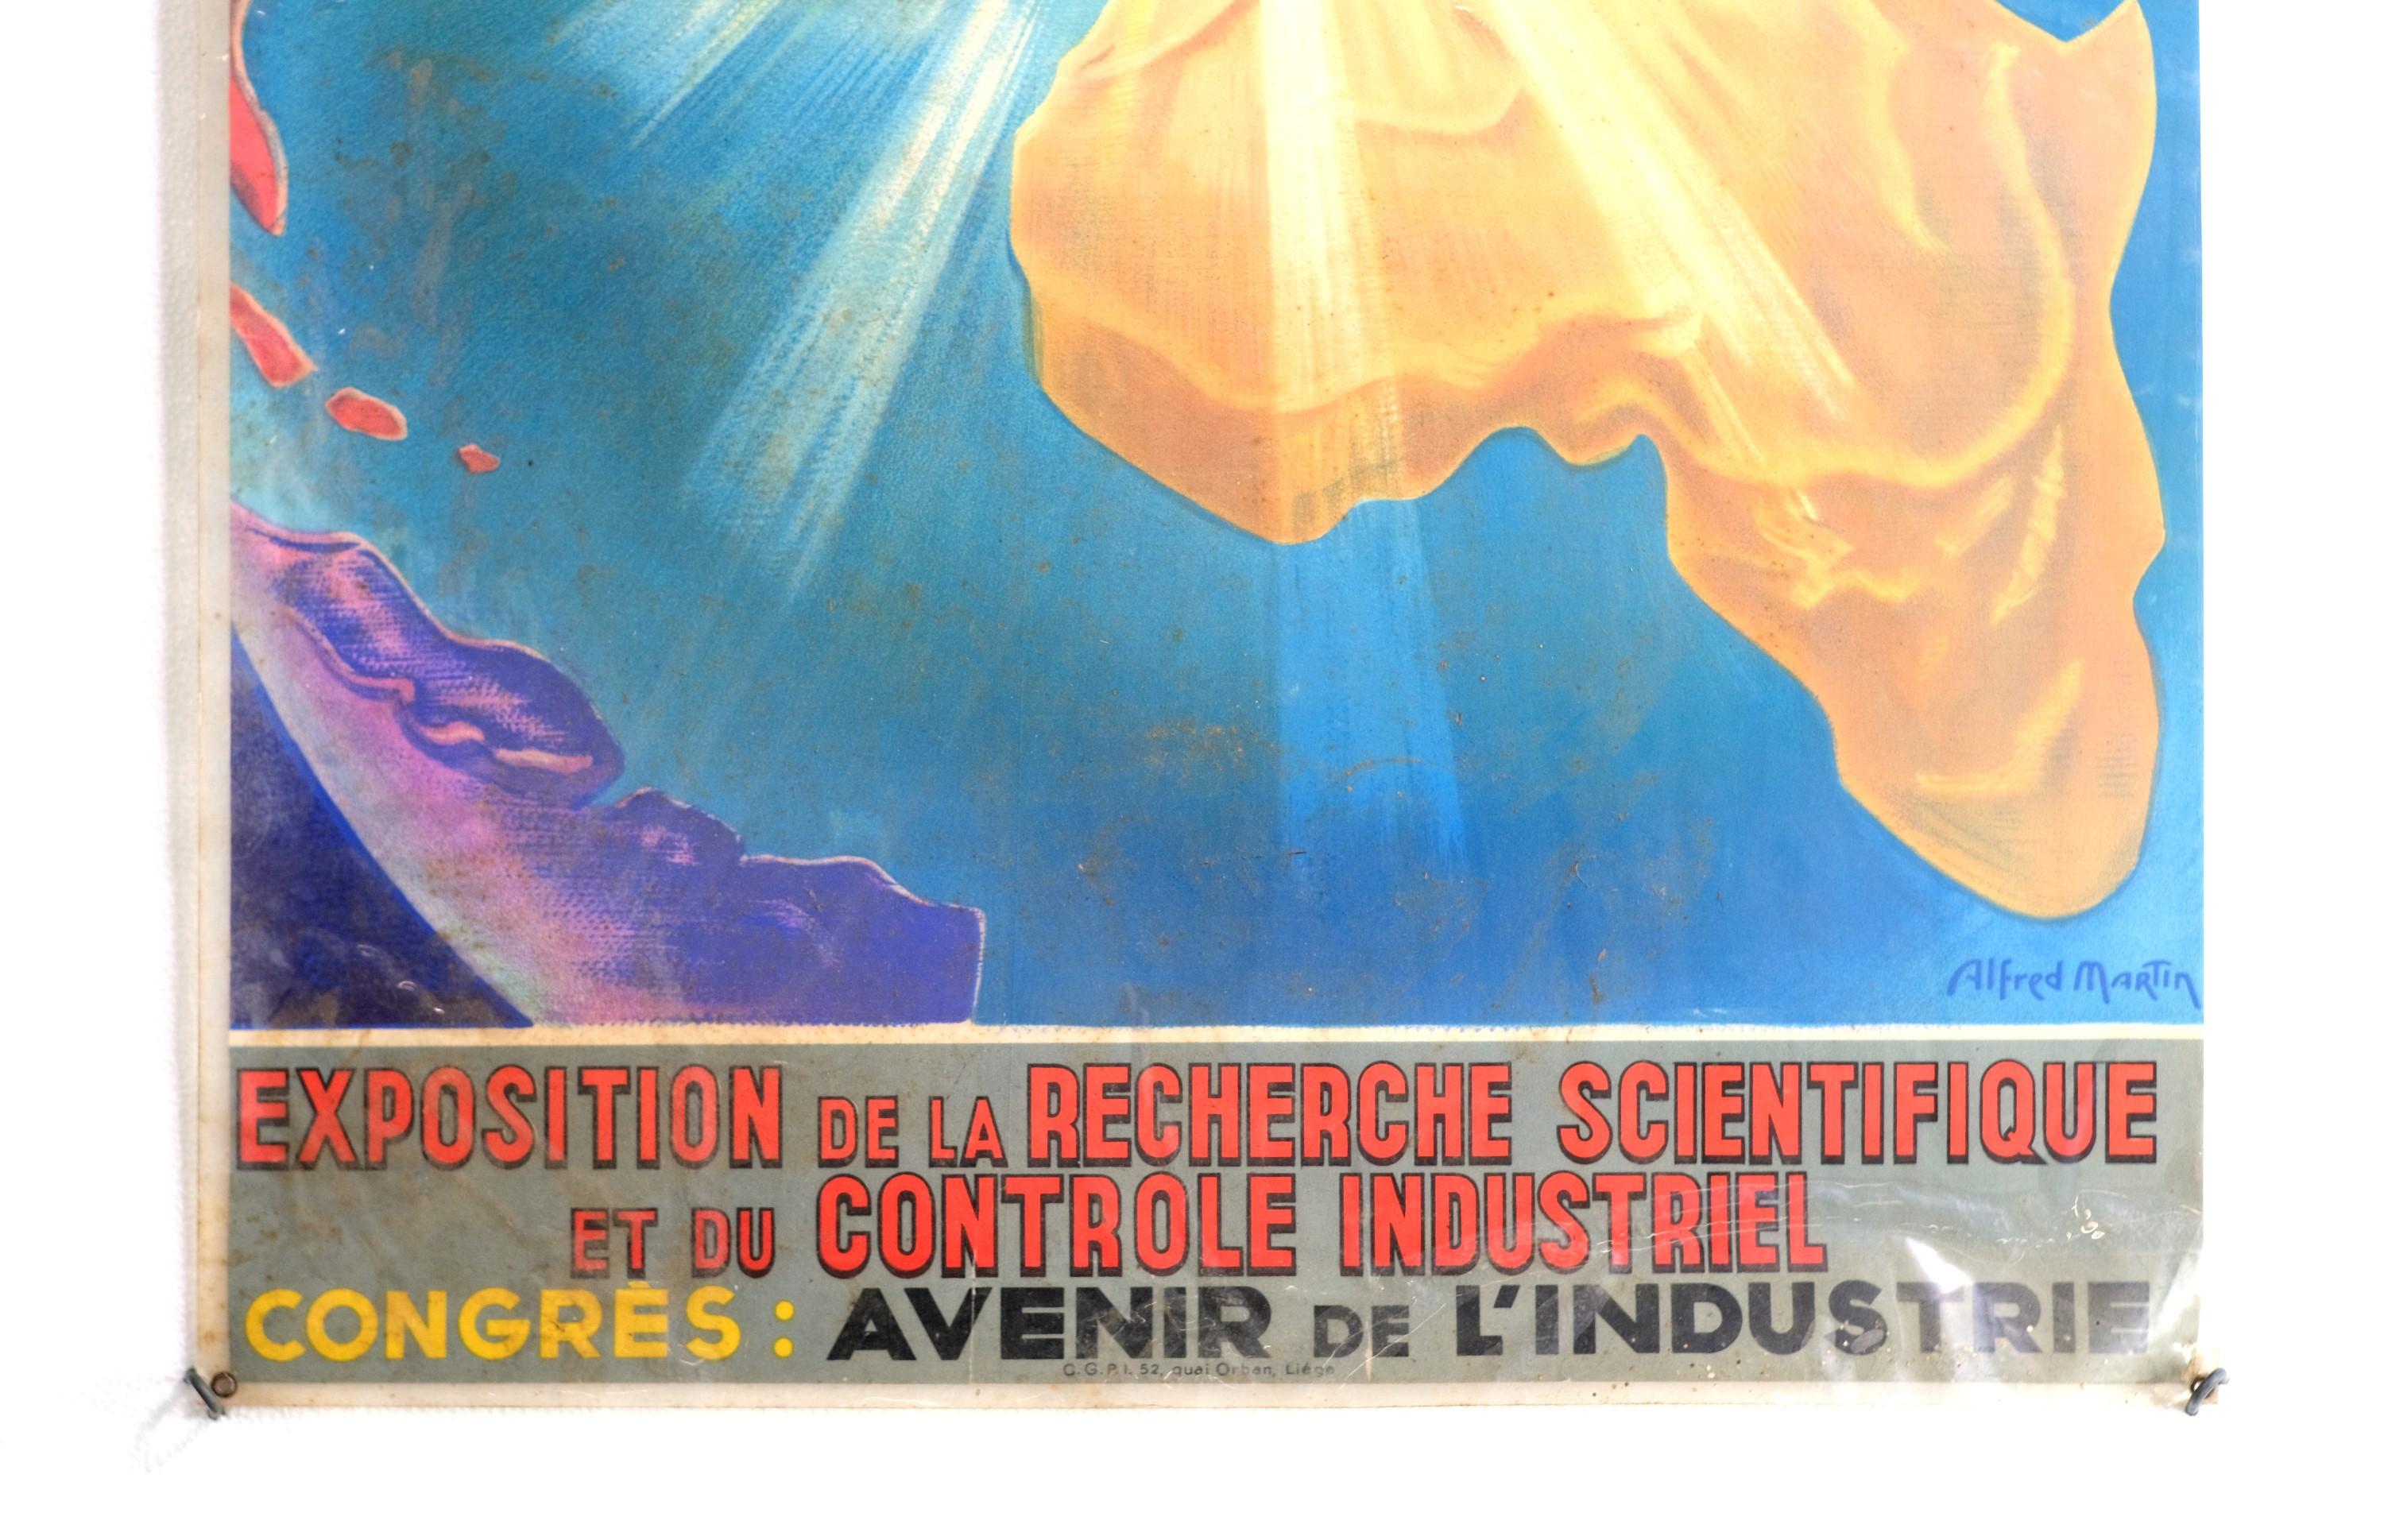 Mid-20th Century French Scientific Industrial Convention Poster of Earth Illustration